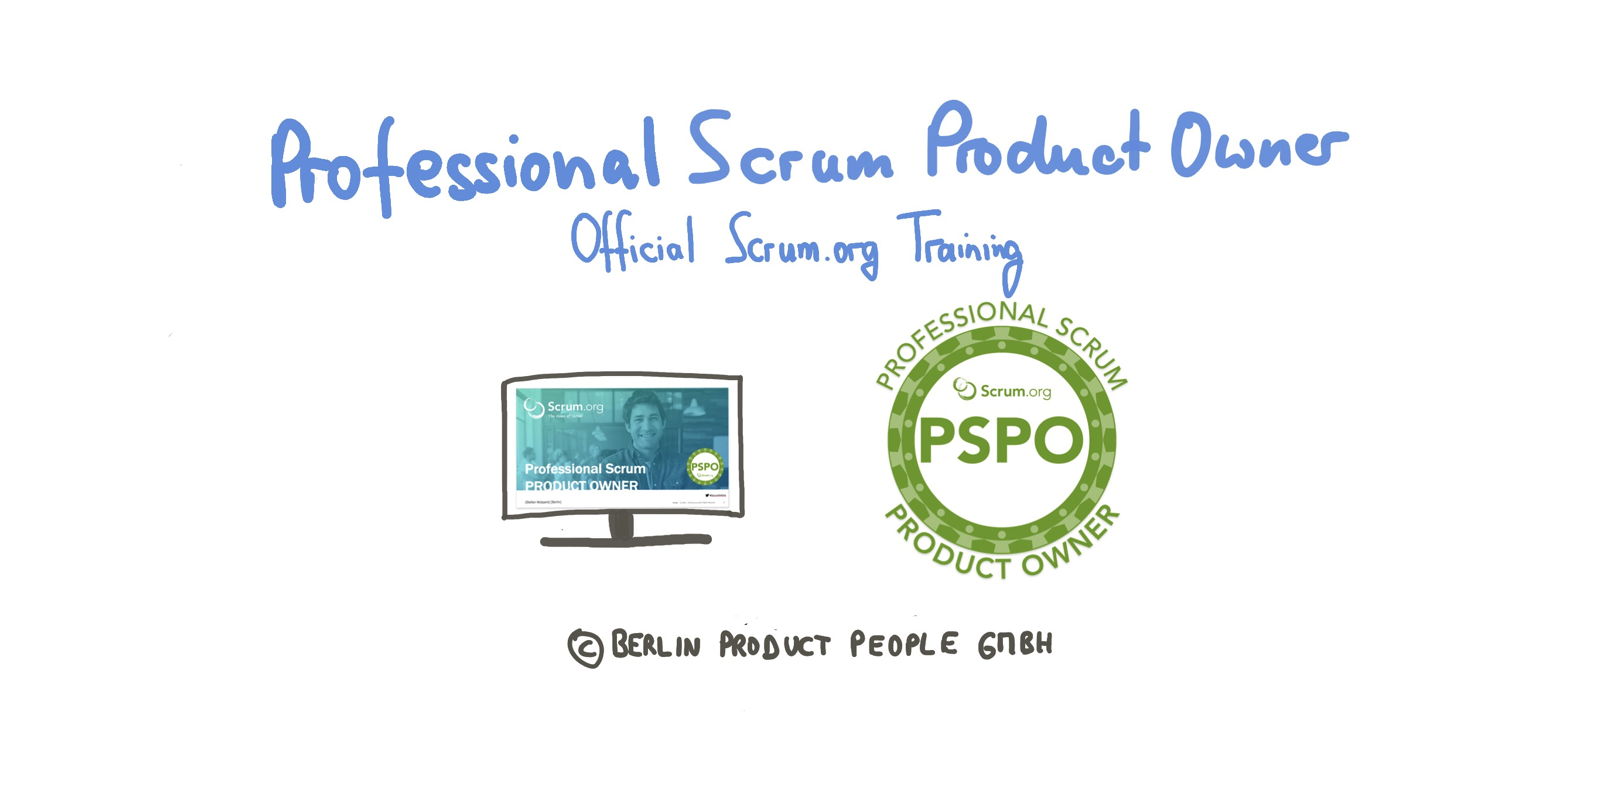 Professional Scrum Product Owner Training — Berlin Product People GmbH